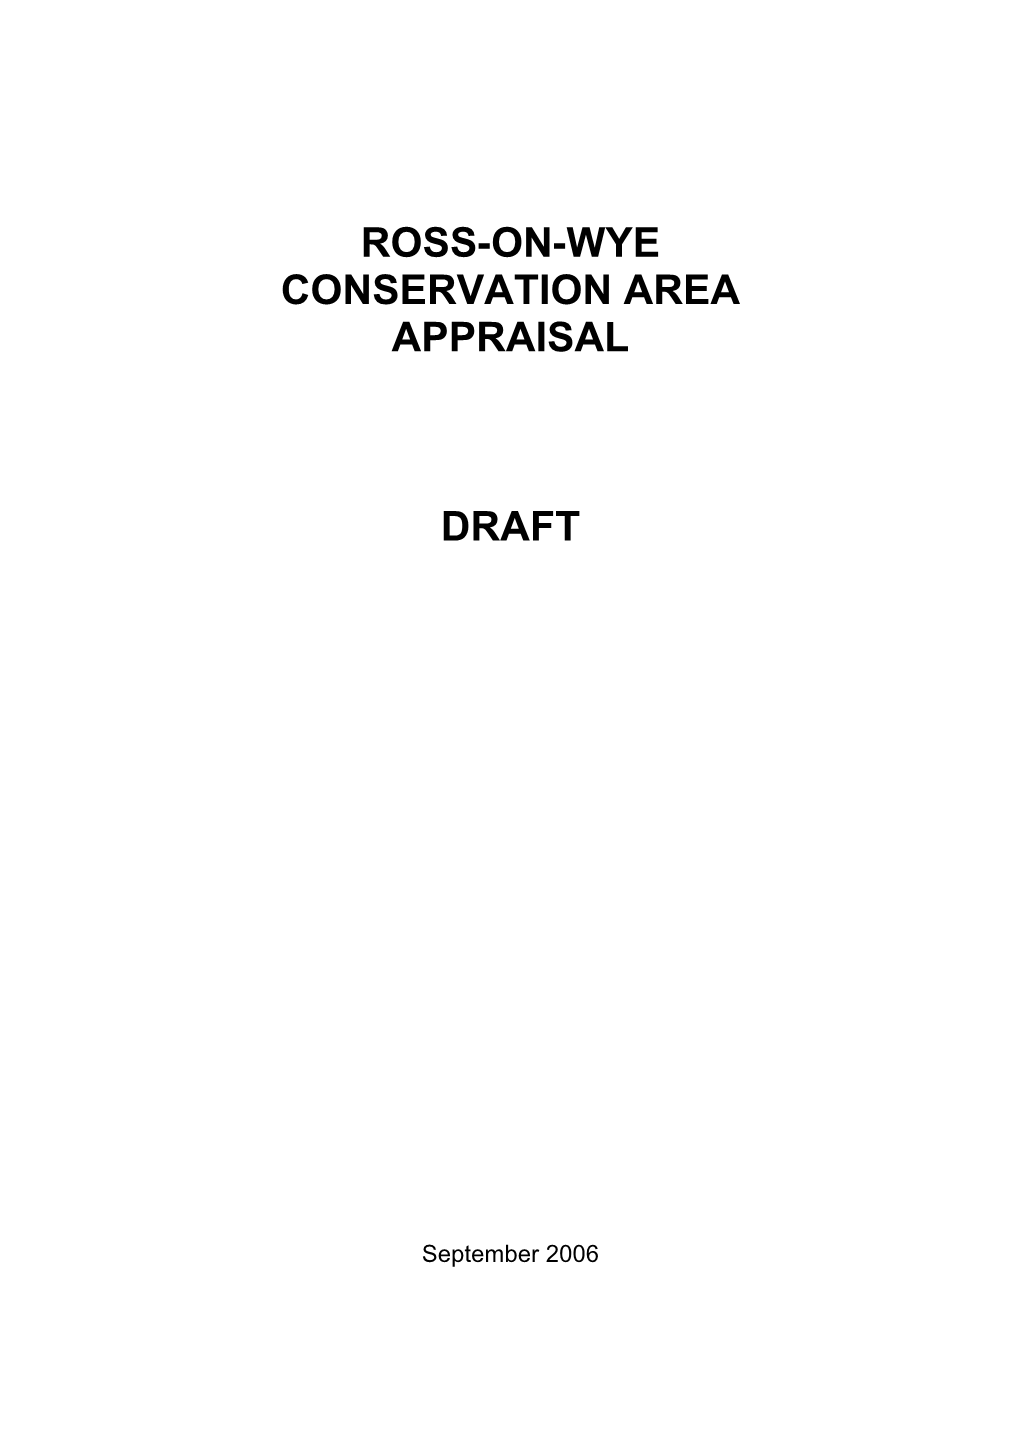 Ross-On-Wye Conservation Area Appraisal Draft